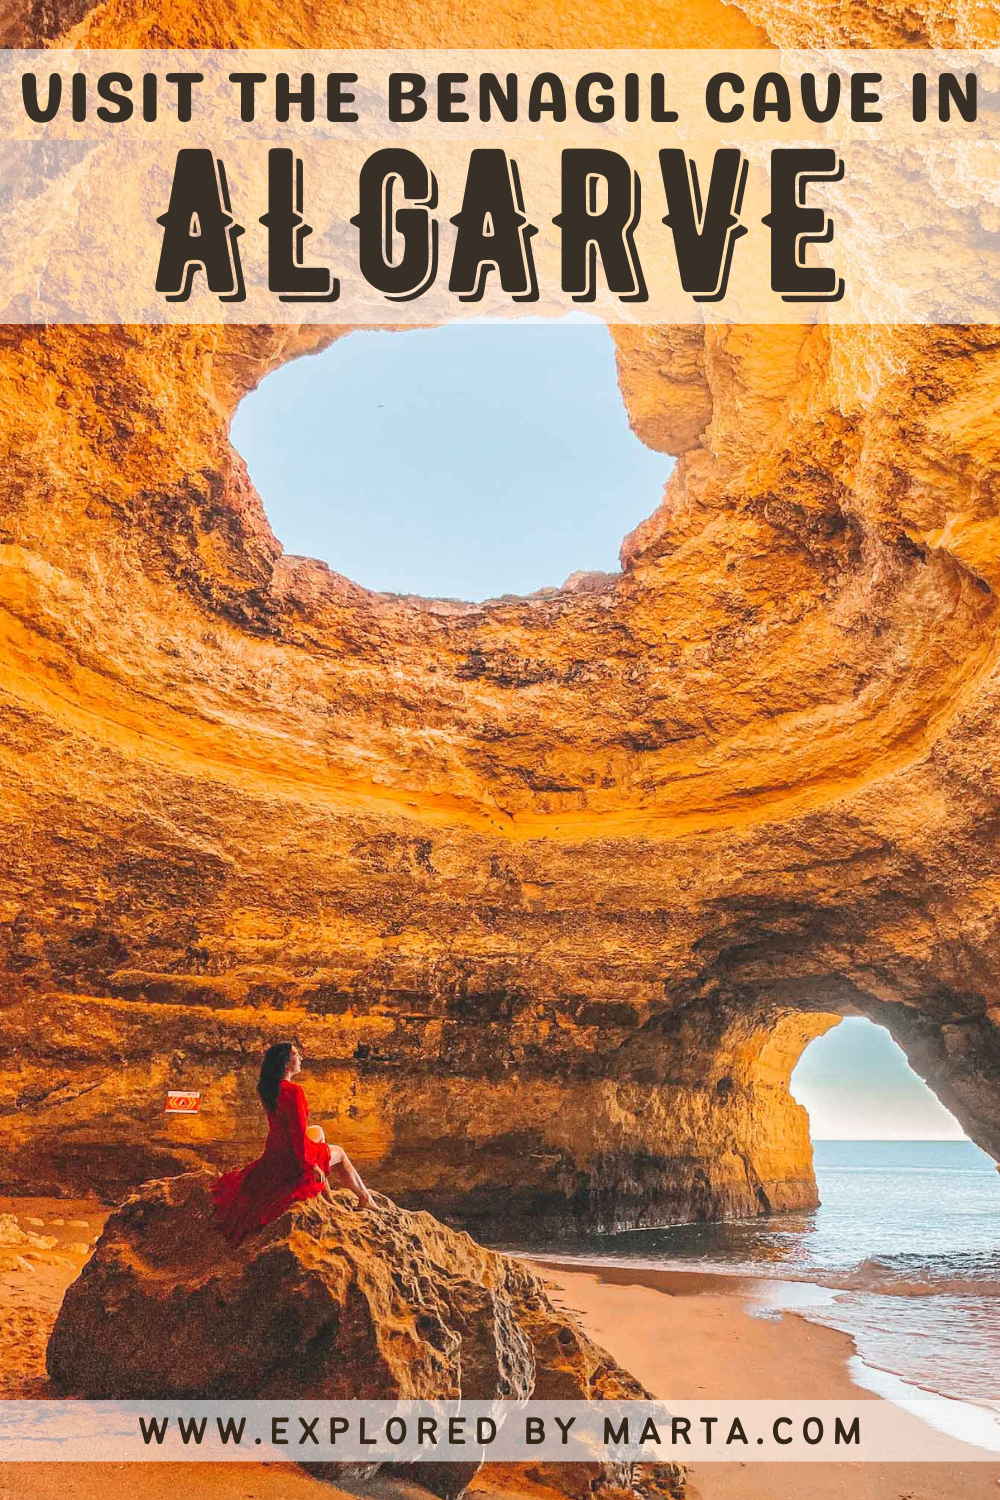 How to get to the Benagil cave in Algarve